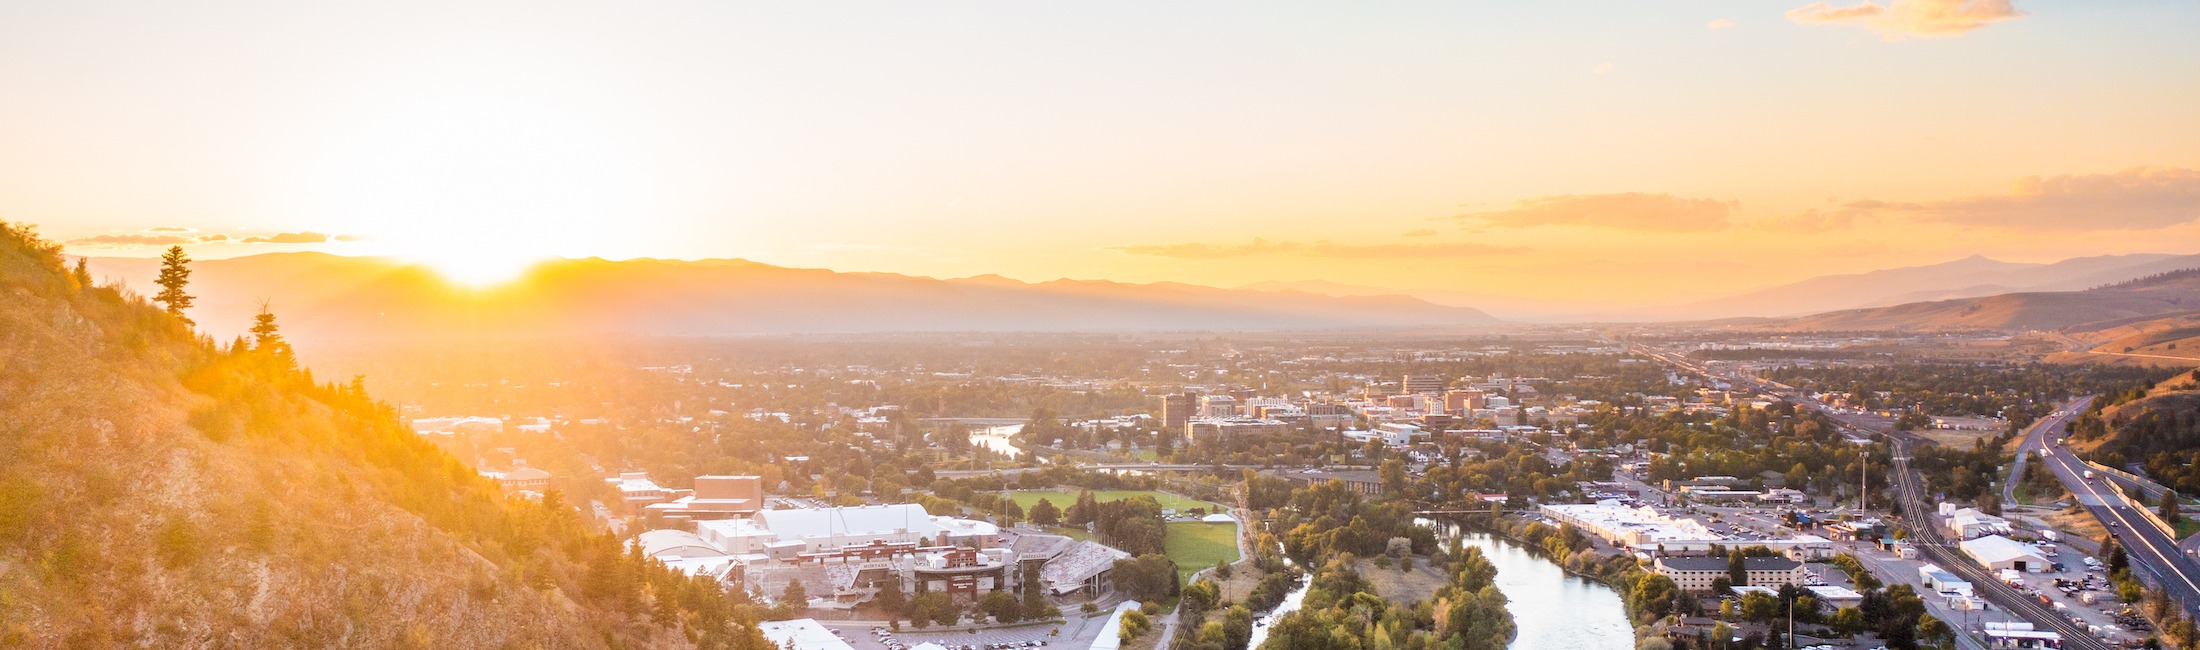 8 Ways Missoula Will Never Leave You